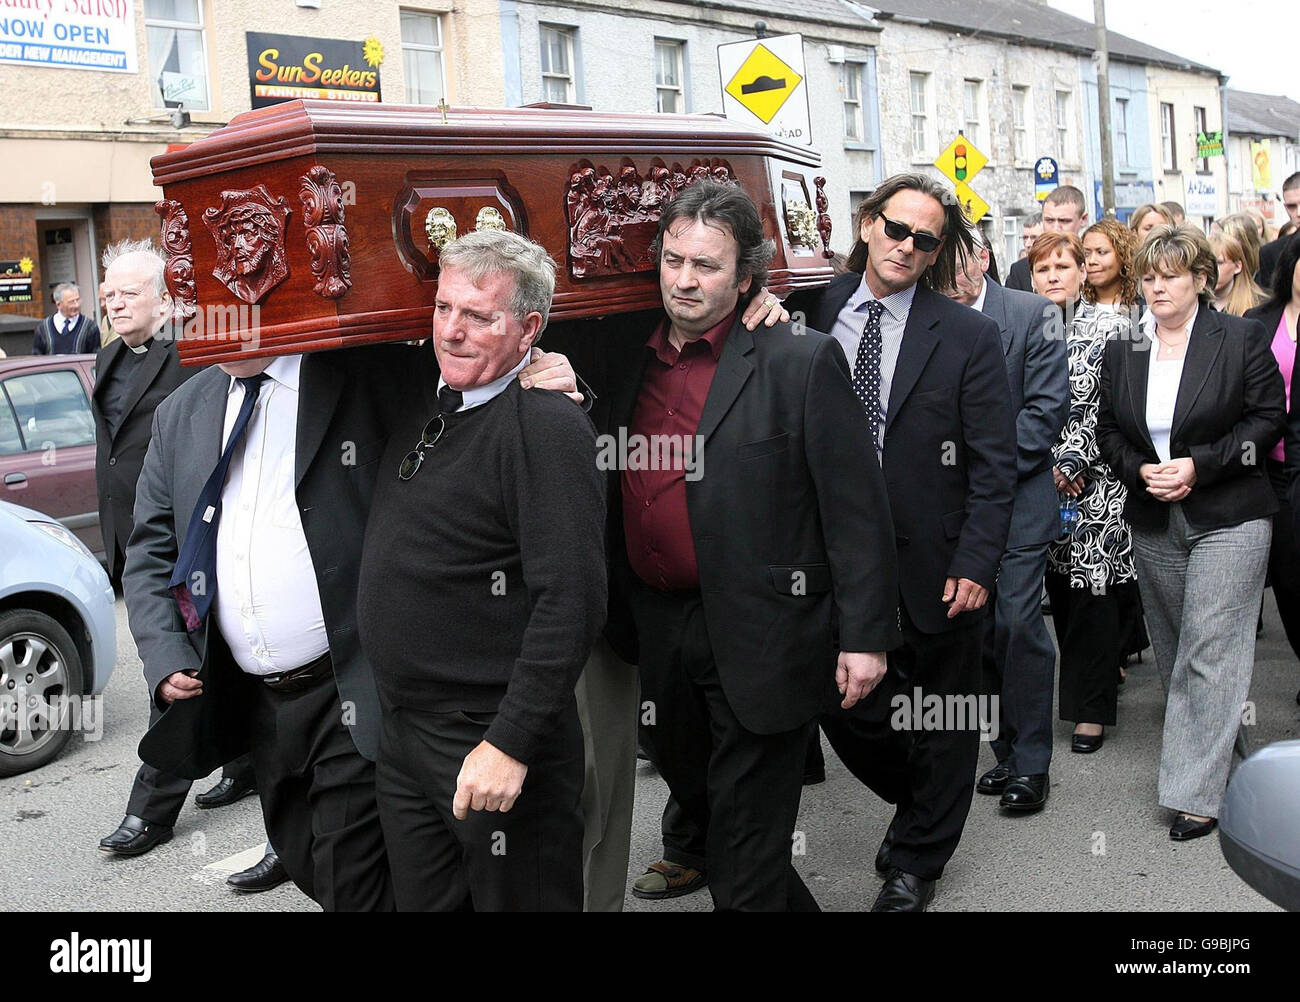 The coffin of Richard McIkenny is carried by (from the front) Gerry Hunter, Gerry Conlon and Paul Hill from St Patrick's Church in Celbridge, Co Kildare, to burial, after he died in Dublin aged 73 following a long illness. Stock Photo